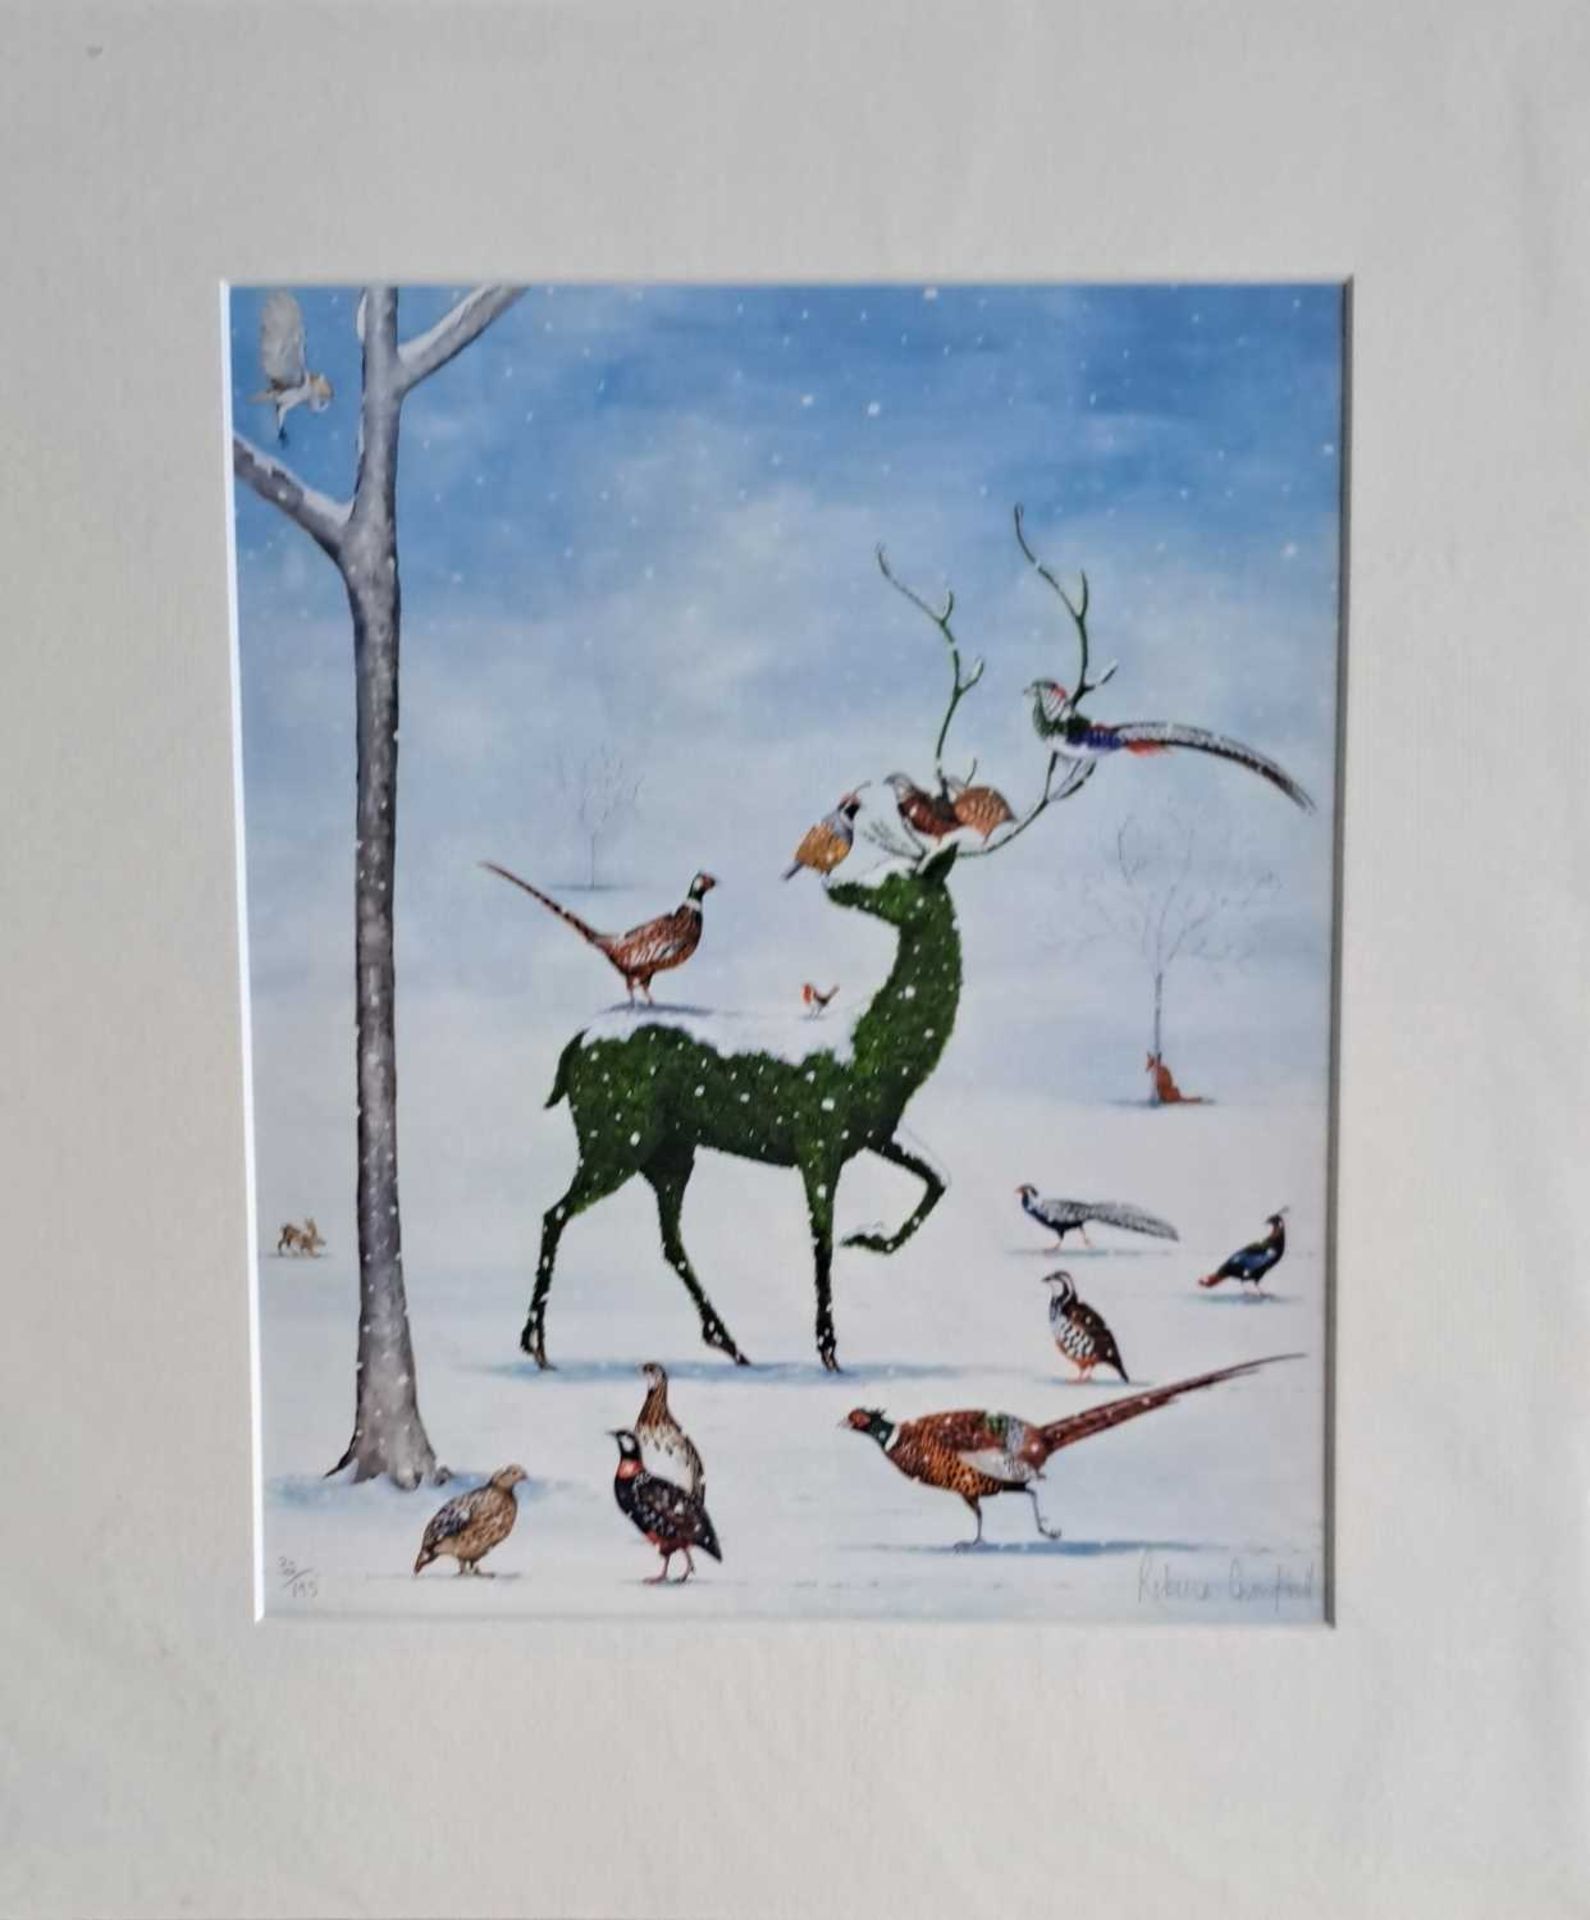 REBECCA CAMPBELL - WINTER WONDERLAND, LIMITED EDITION 32/195. 545 x 470 mm.